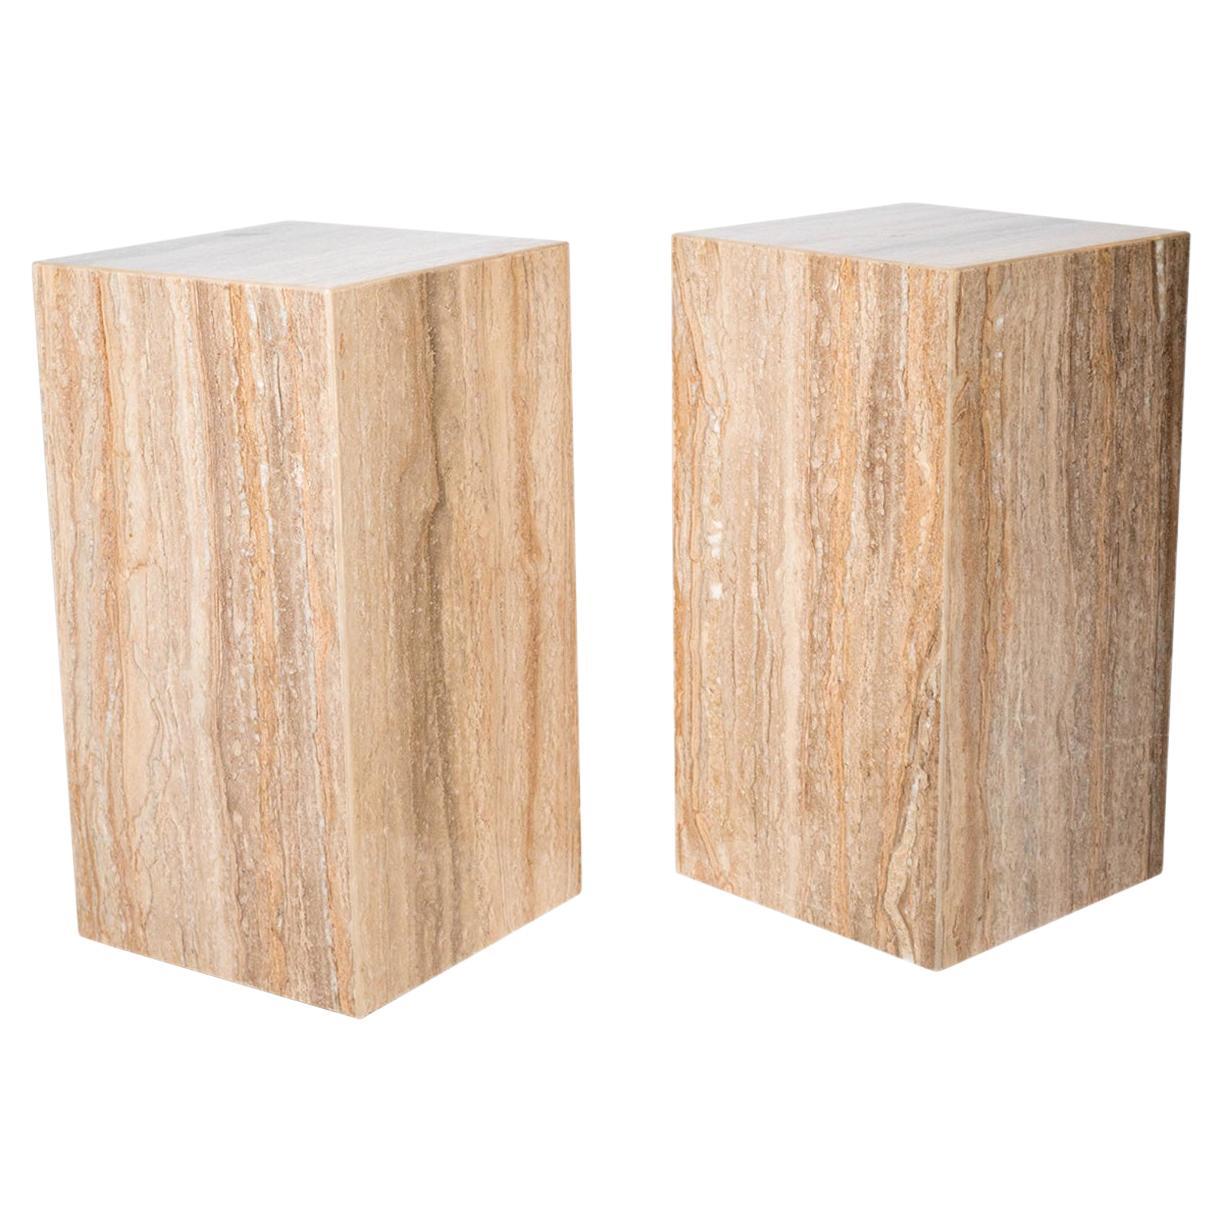 1980s Italian Polished Travertine Tower Cube Side Tables - a Pair For Sale